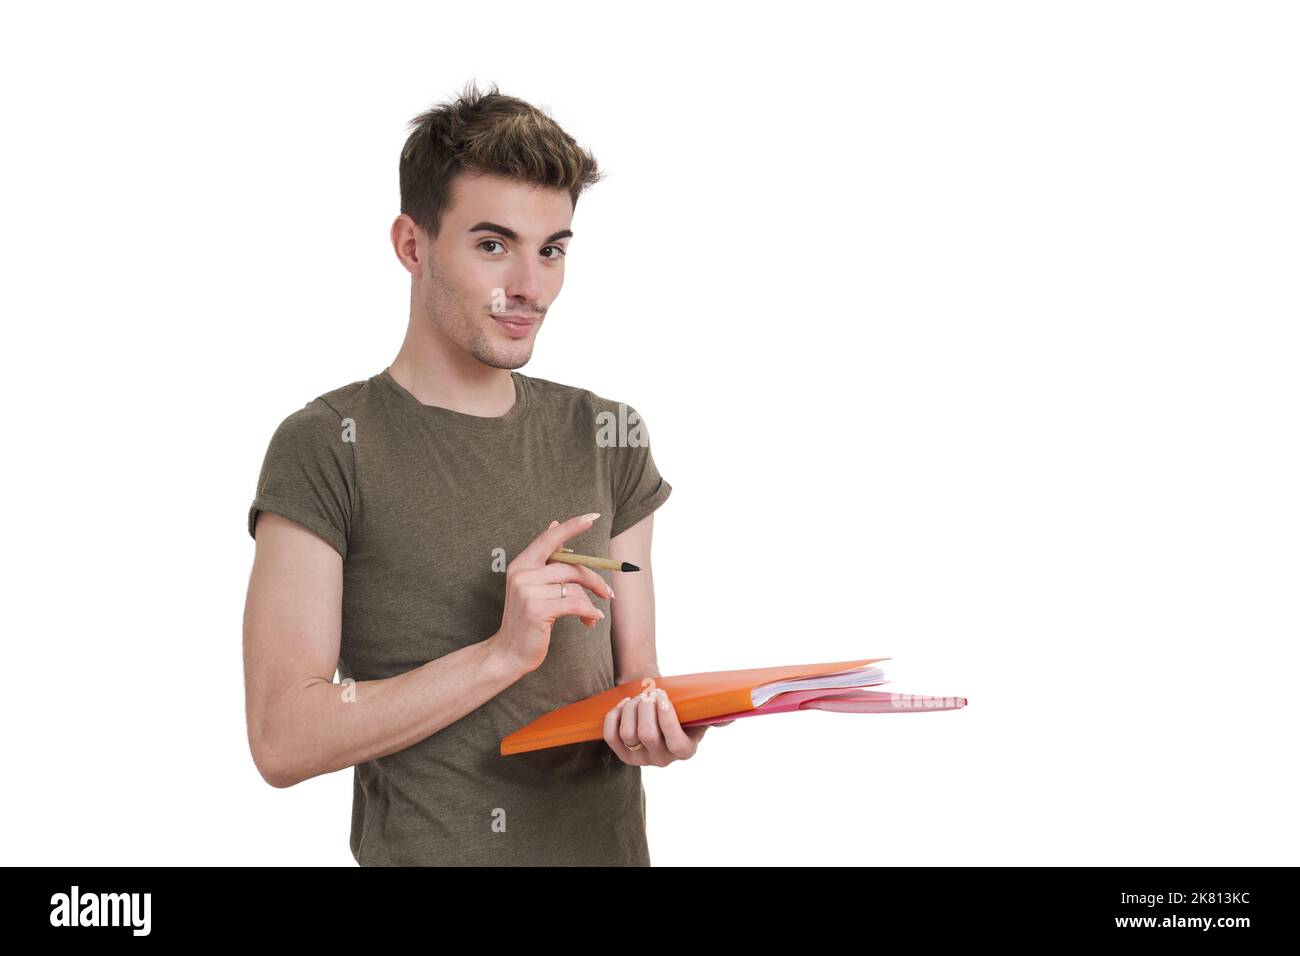 Young caucasian student smiling with pen and folder, isolated. Stock Photo